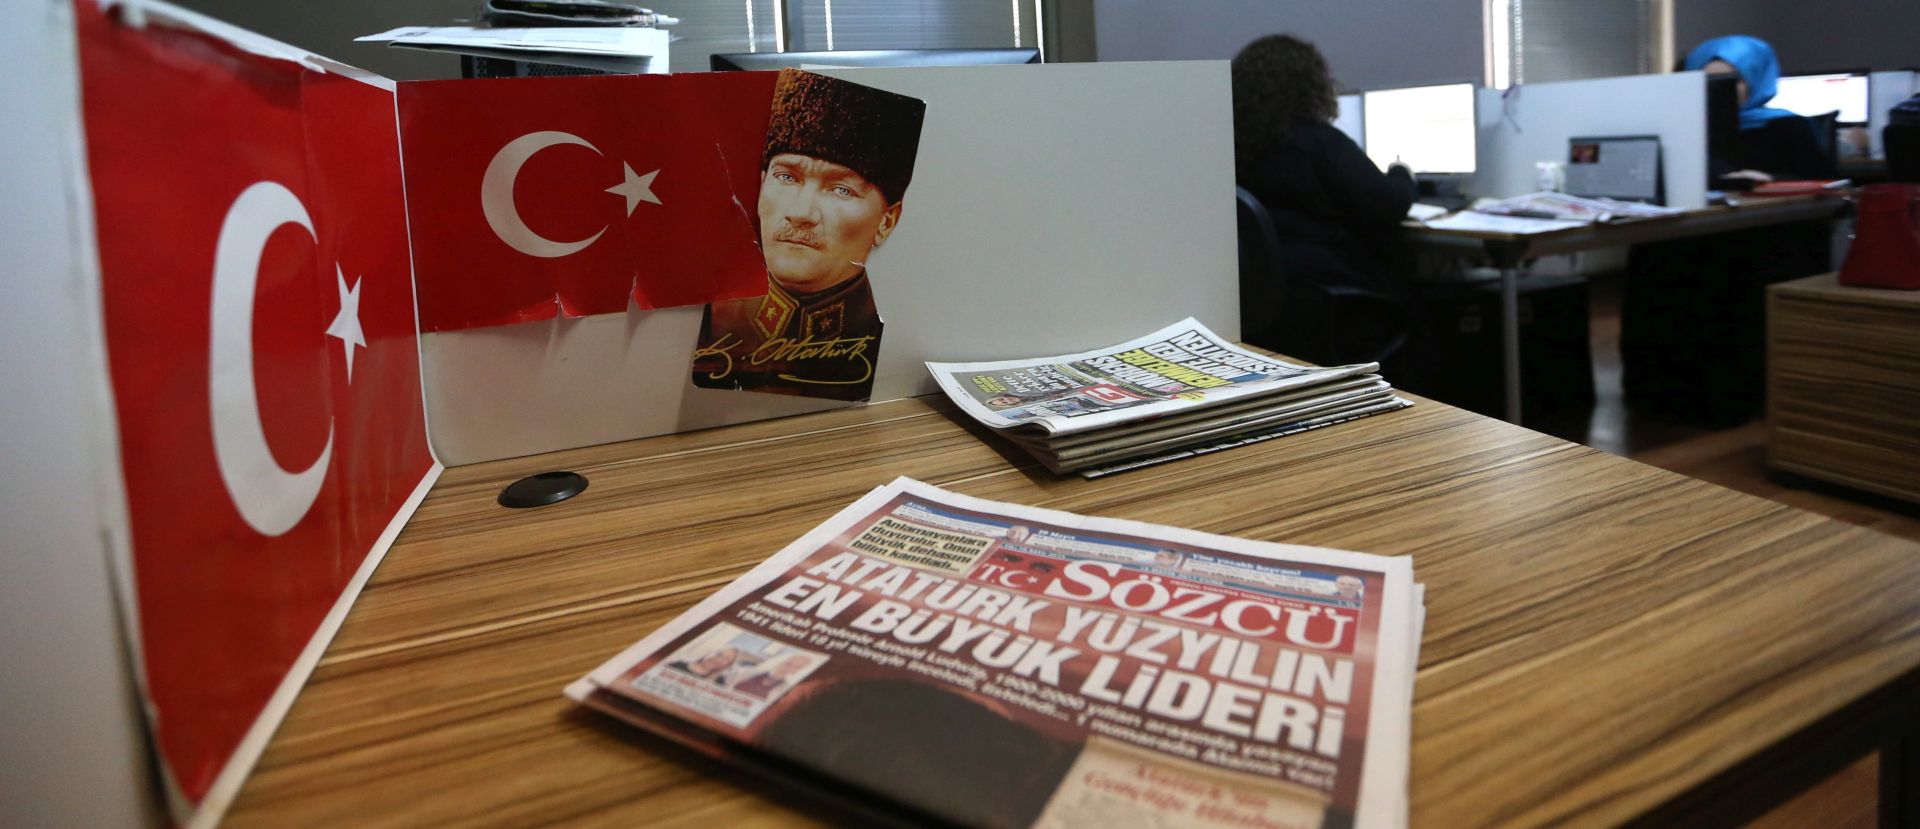 epa05973780 Journalists work at the Sozcu newspaper in Istanbul, Turkey 19 May 2017. Turkish police started an operation on opposition Sozcu Newspaper and arrest the owner and three employees over alleged ties to the movement of Fethullah Gulen, as a part of investigation of the coup attempt on 15 July, according to local media on 19 May.  EPA/ERDEM SAHIN